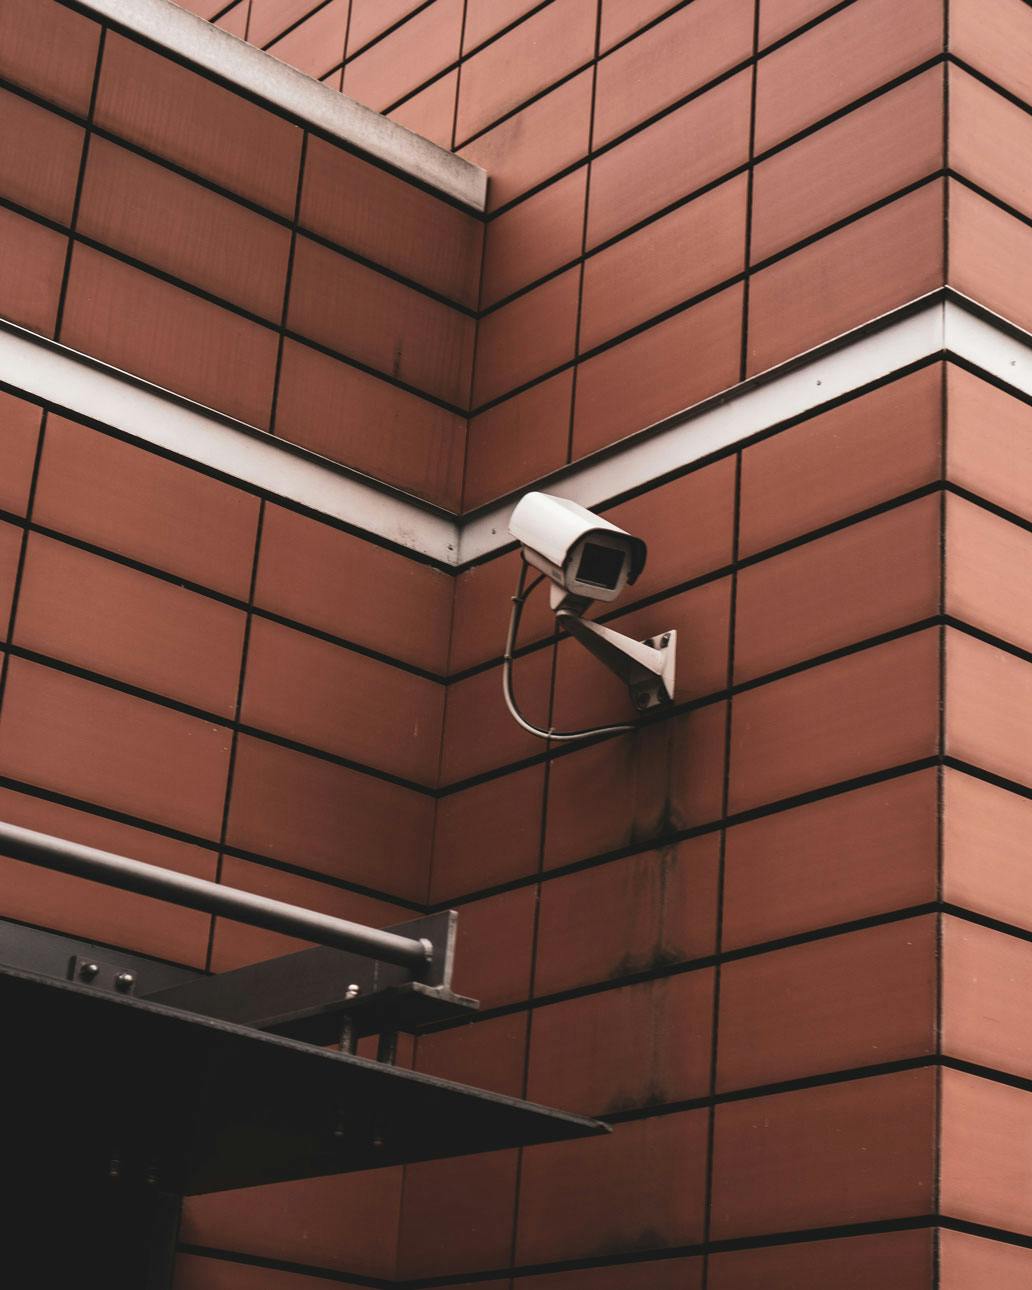 Internet in wireless security cameras